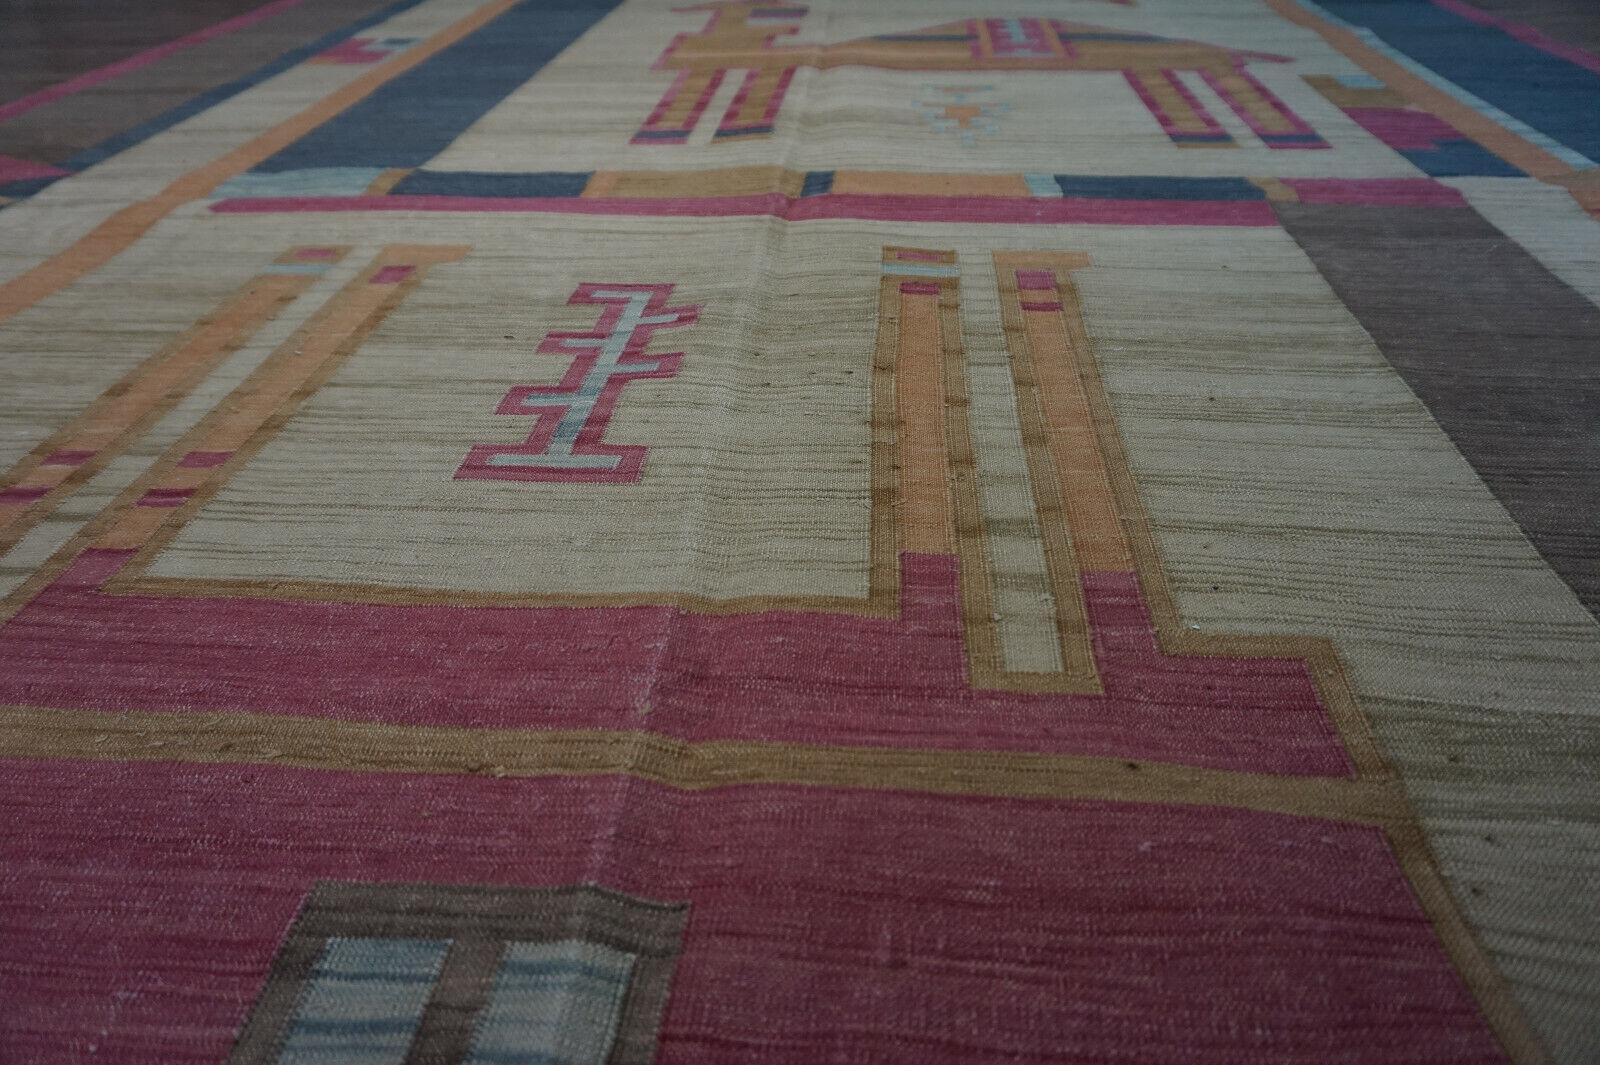 Handmade Vintage Indian Dhurrie Kilim Rug 6.3' x 8.3', 1970s - 1D46 In Good Condition For Sale In Bordeaux, FR